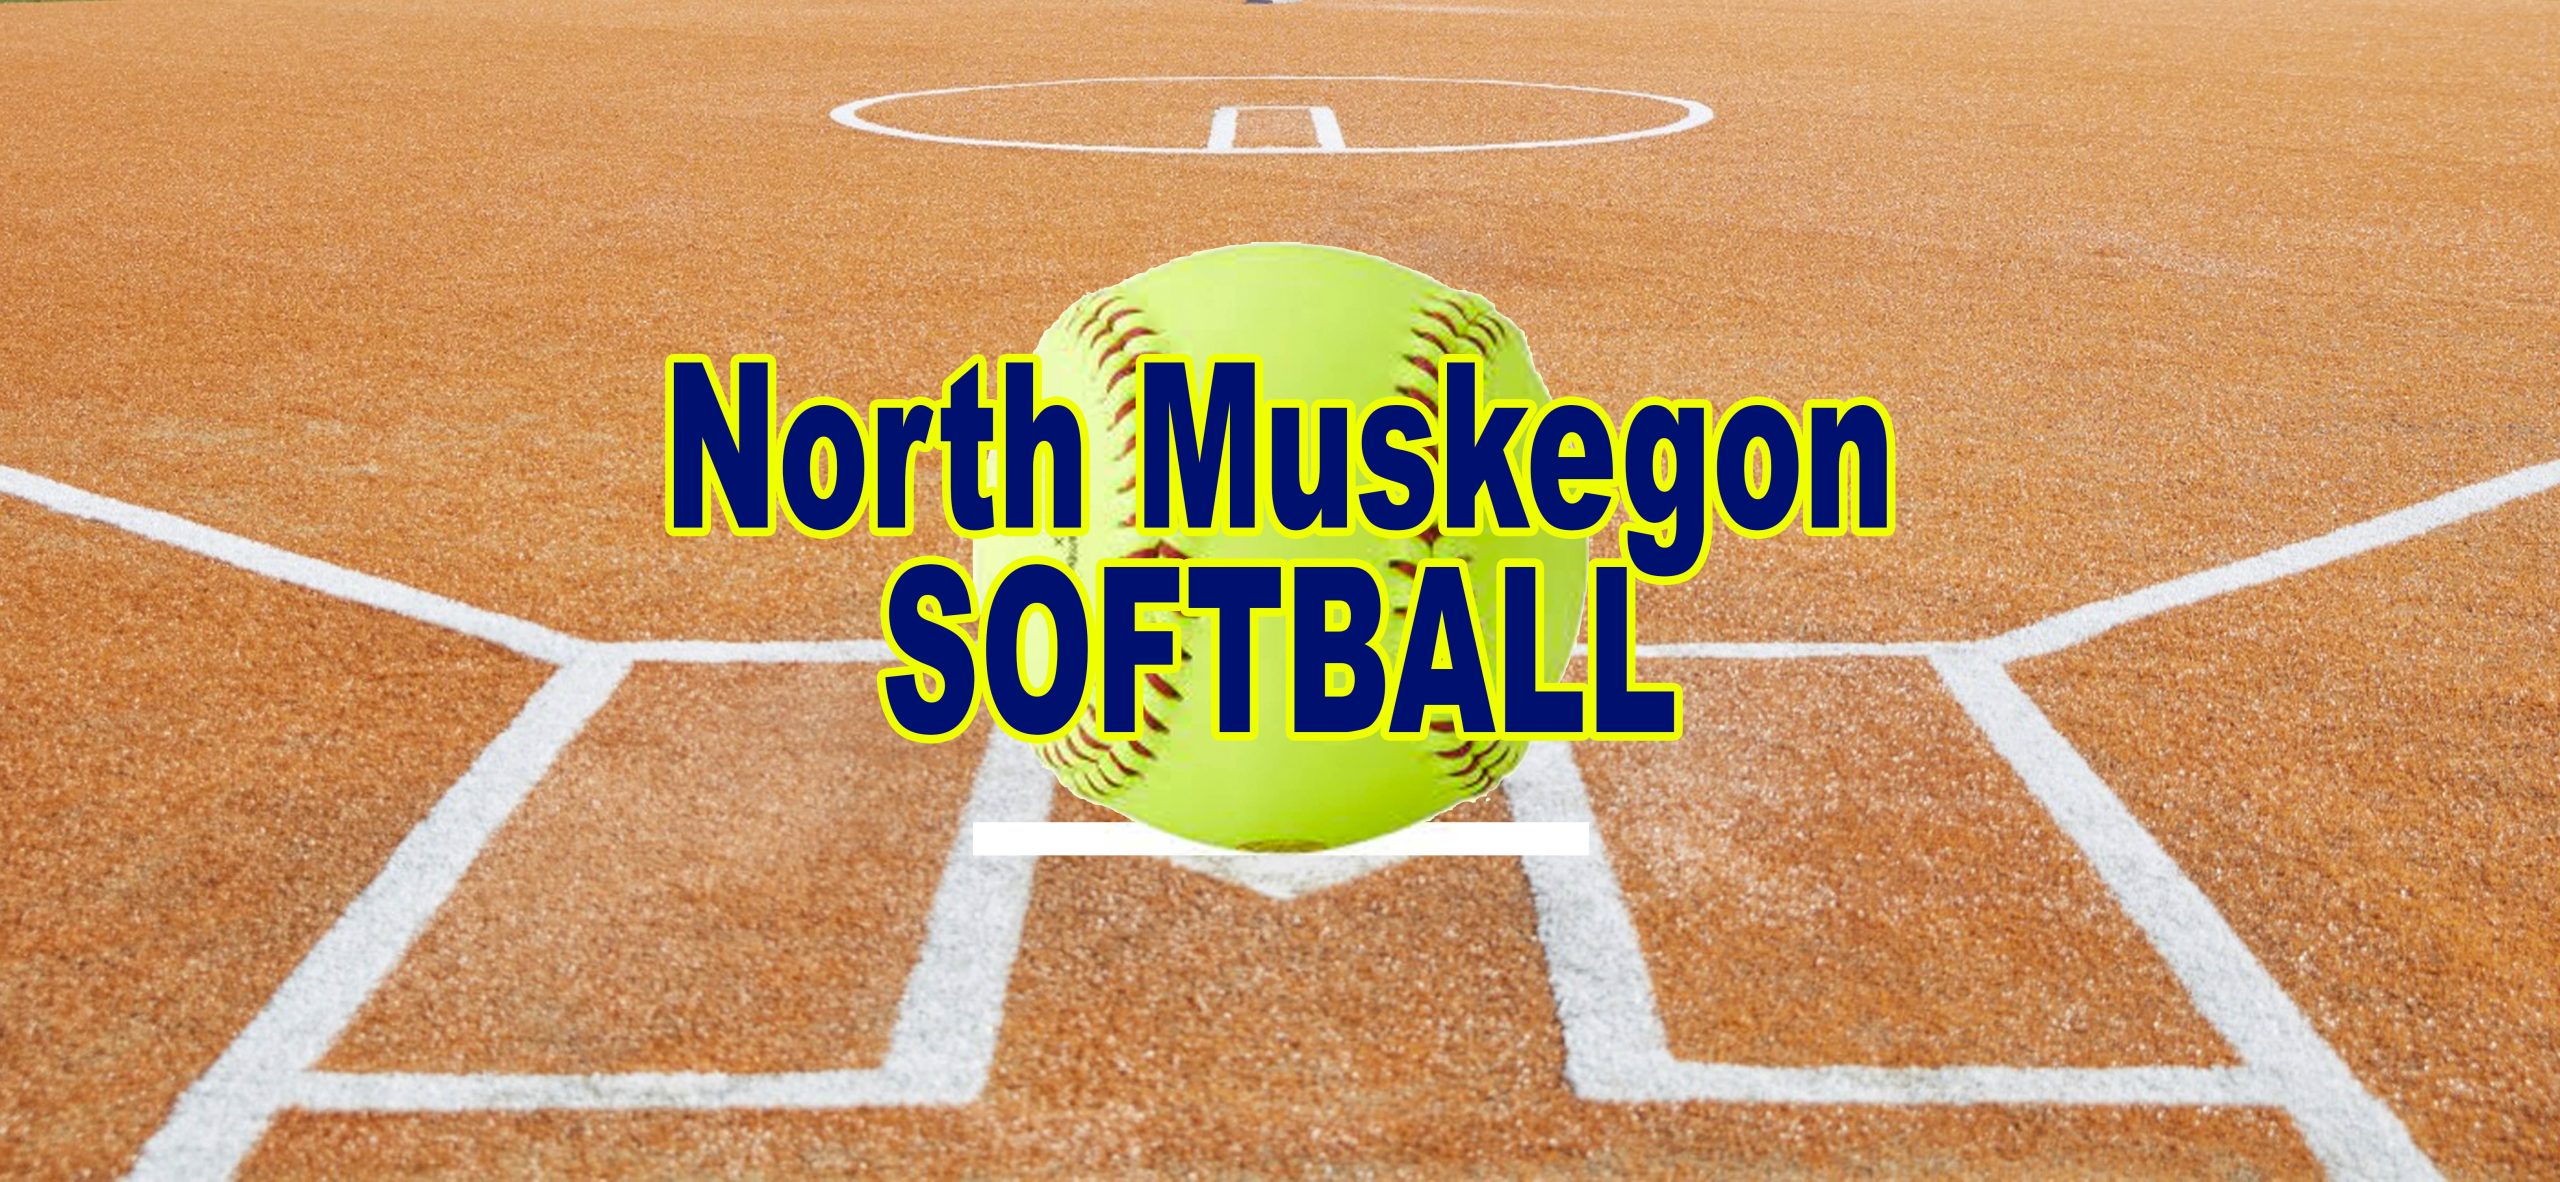 Hart, North Muskegon each win a softball game in West Michigan Conference doubleheader